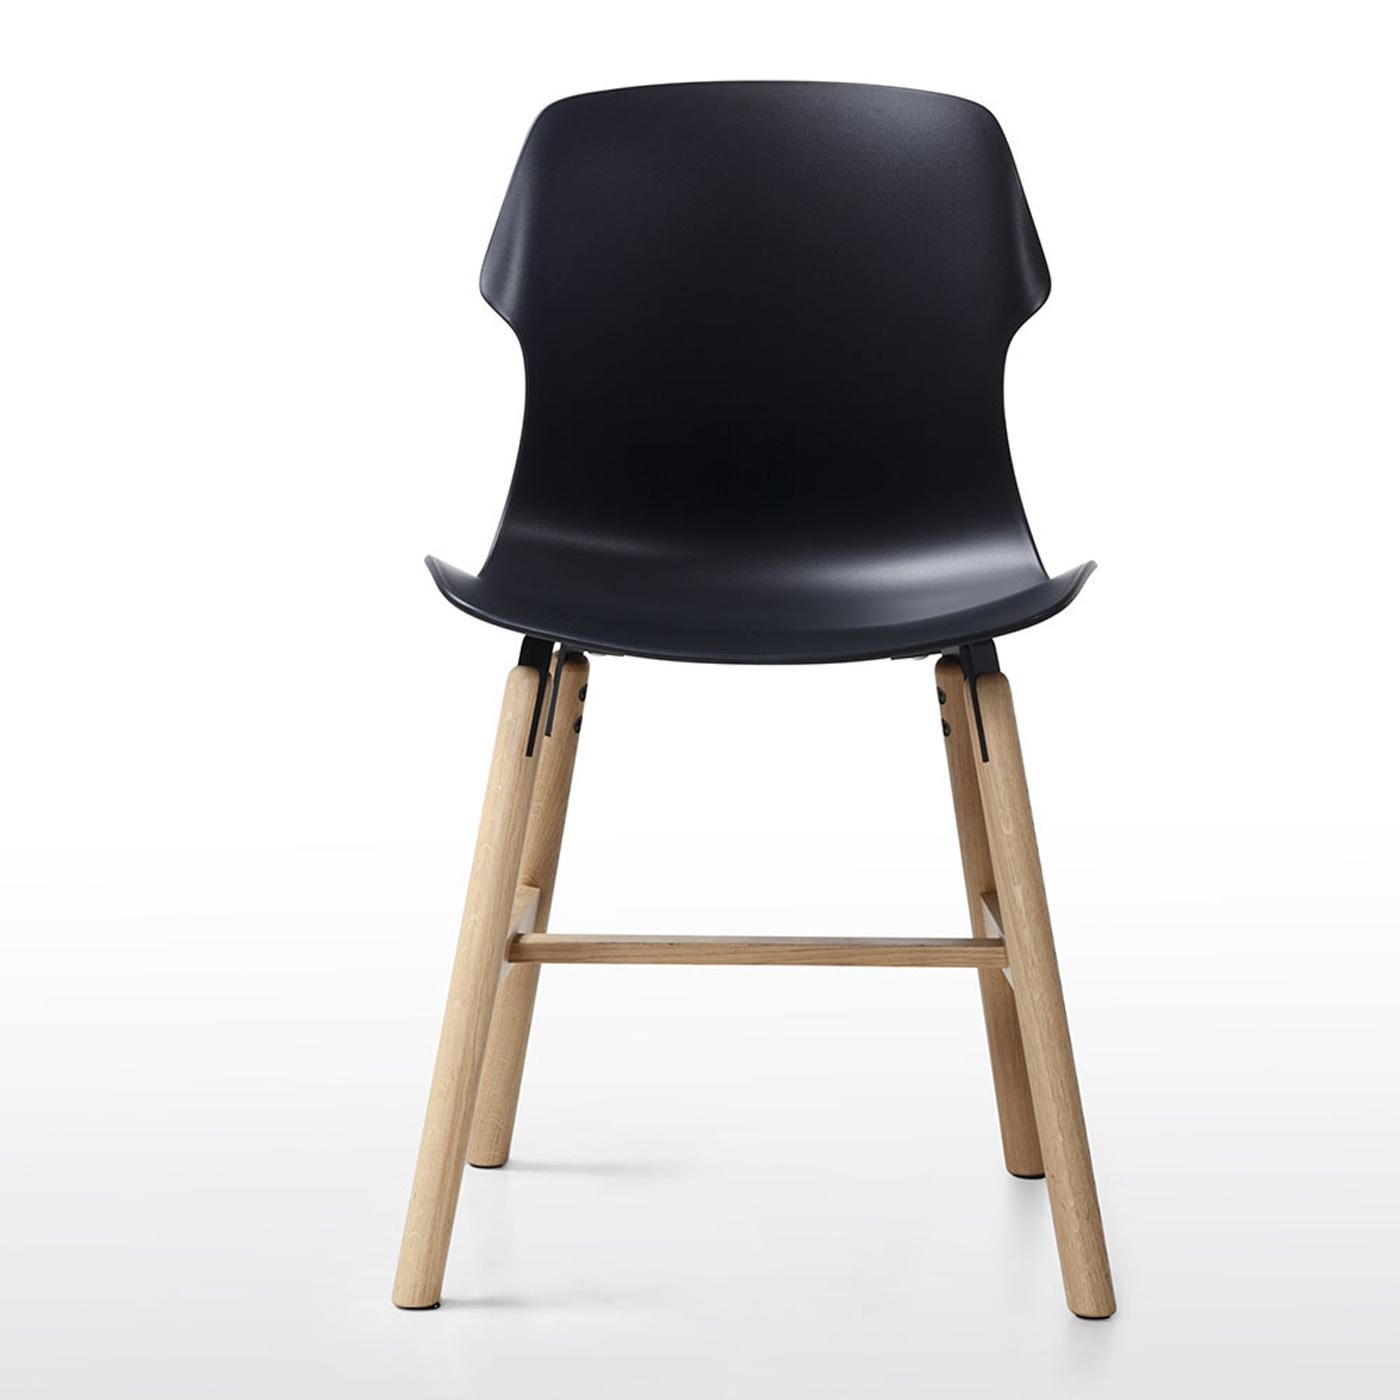 This modern, versatile design is offered in a wide range of colors and materials to be used in different interior styles. The contoured and ergonomic seat (45 cm height) is made of black polypropylene, glossy on the back and matte in the front, and